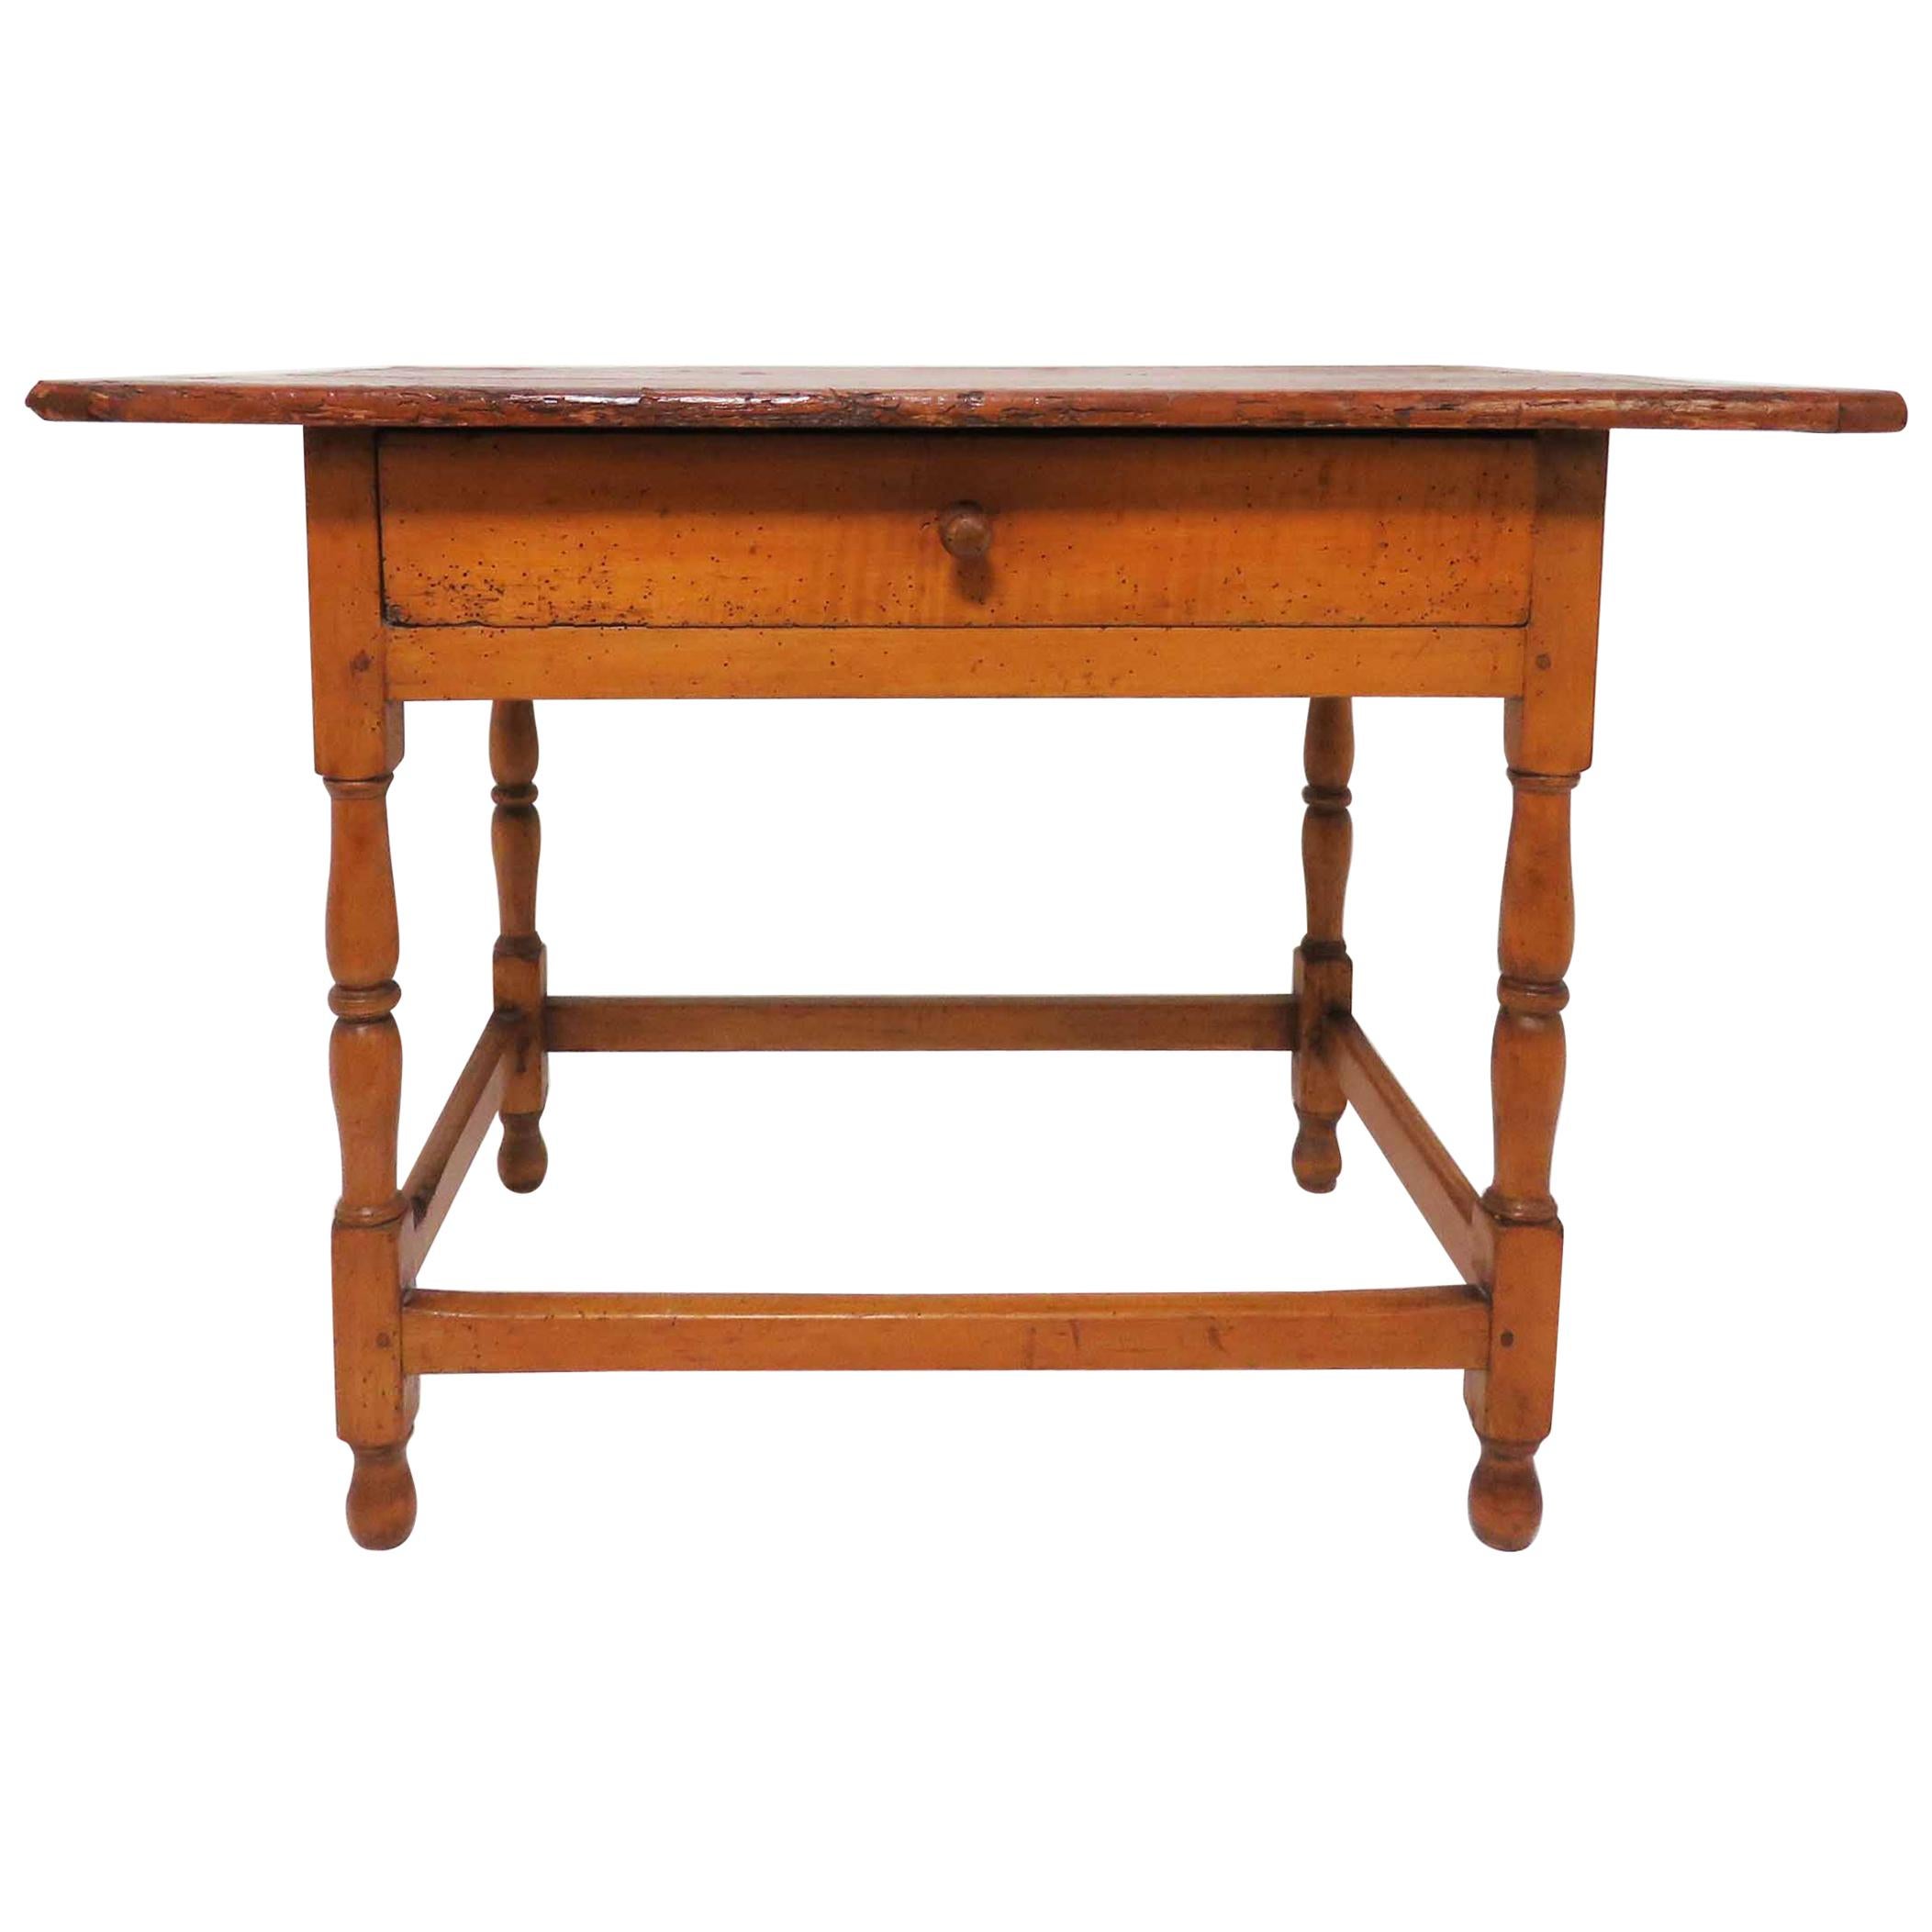 18th Century Antique American Tavern Table with Breadboard Top